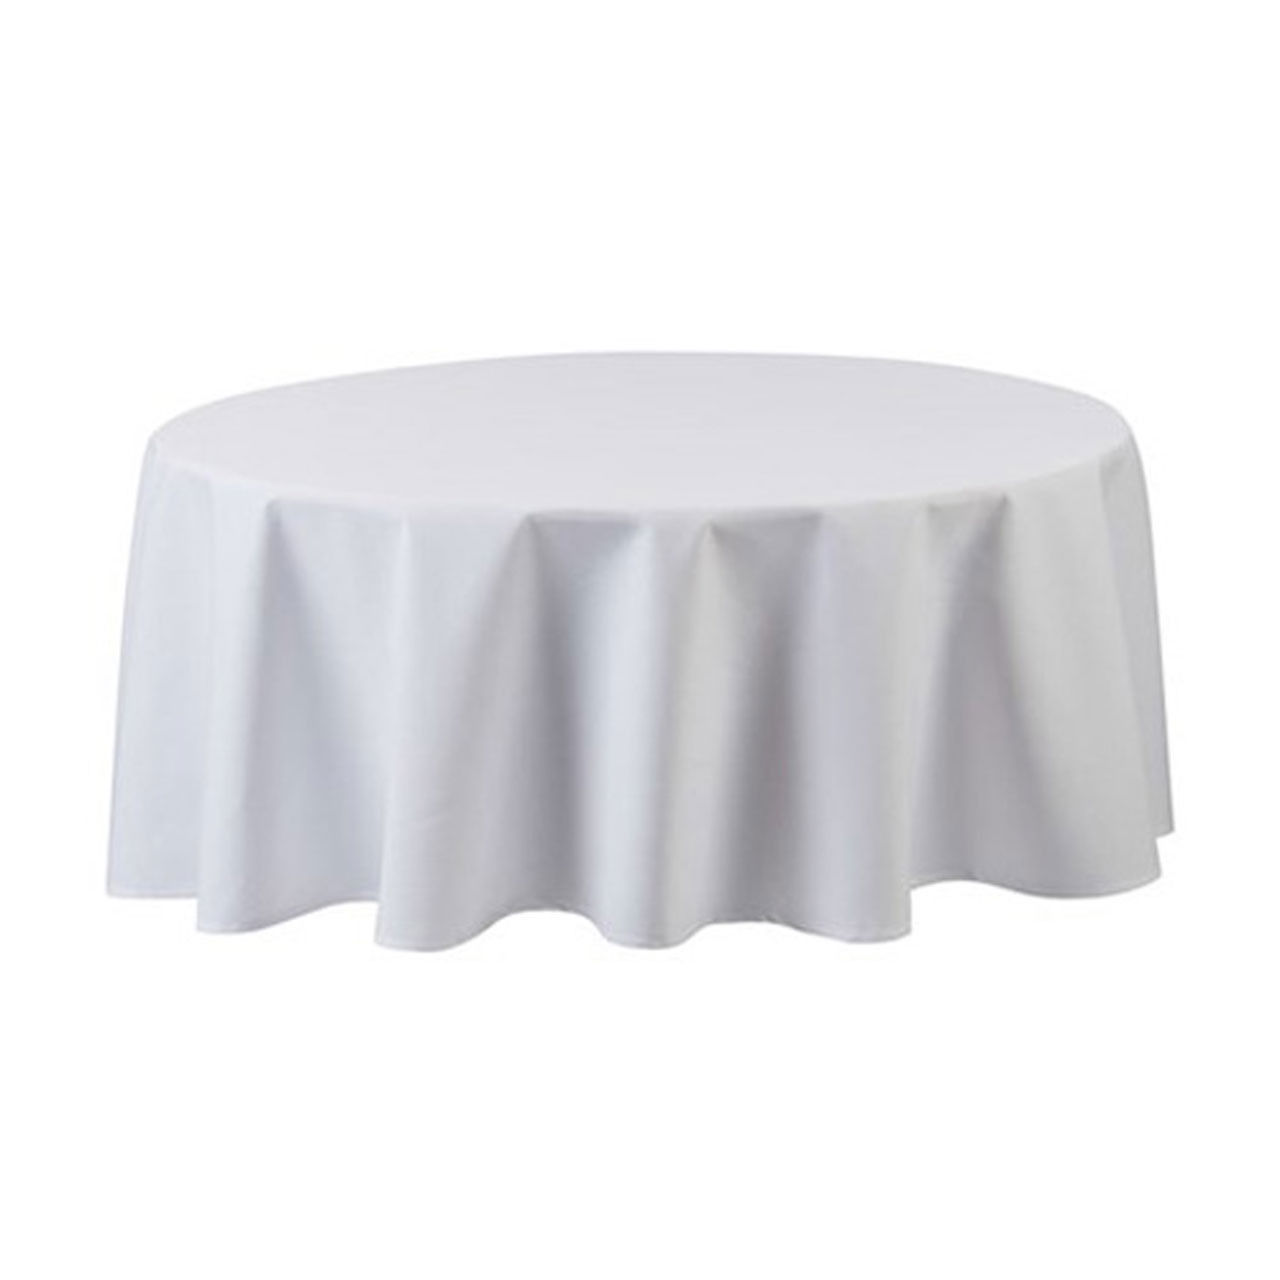 From where are the 90 round tablecloth, Seamless White 90" Rounds, imported?